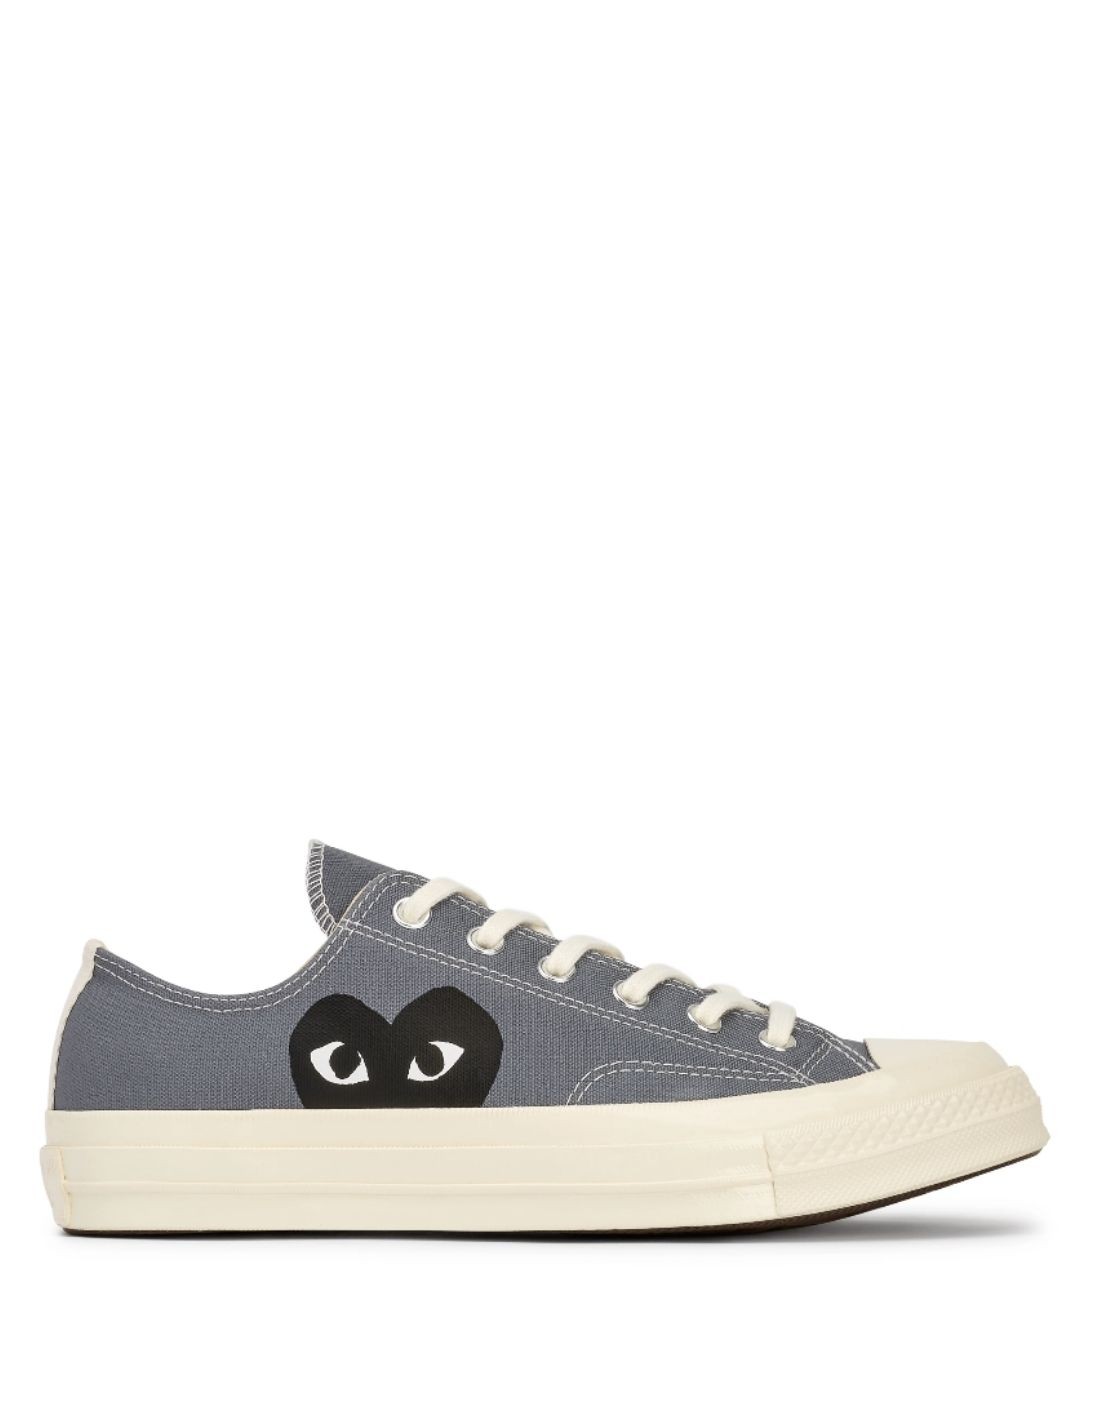 CDG Play X low sneakers monoheart in grey